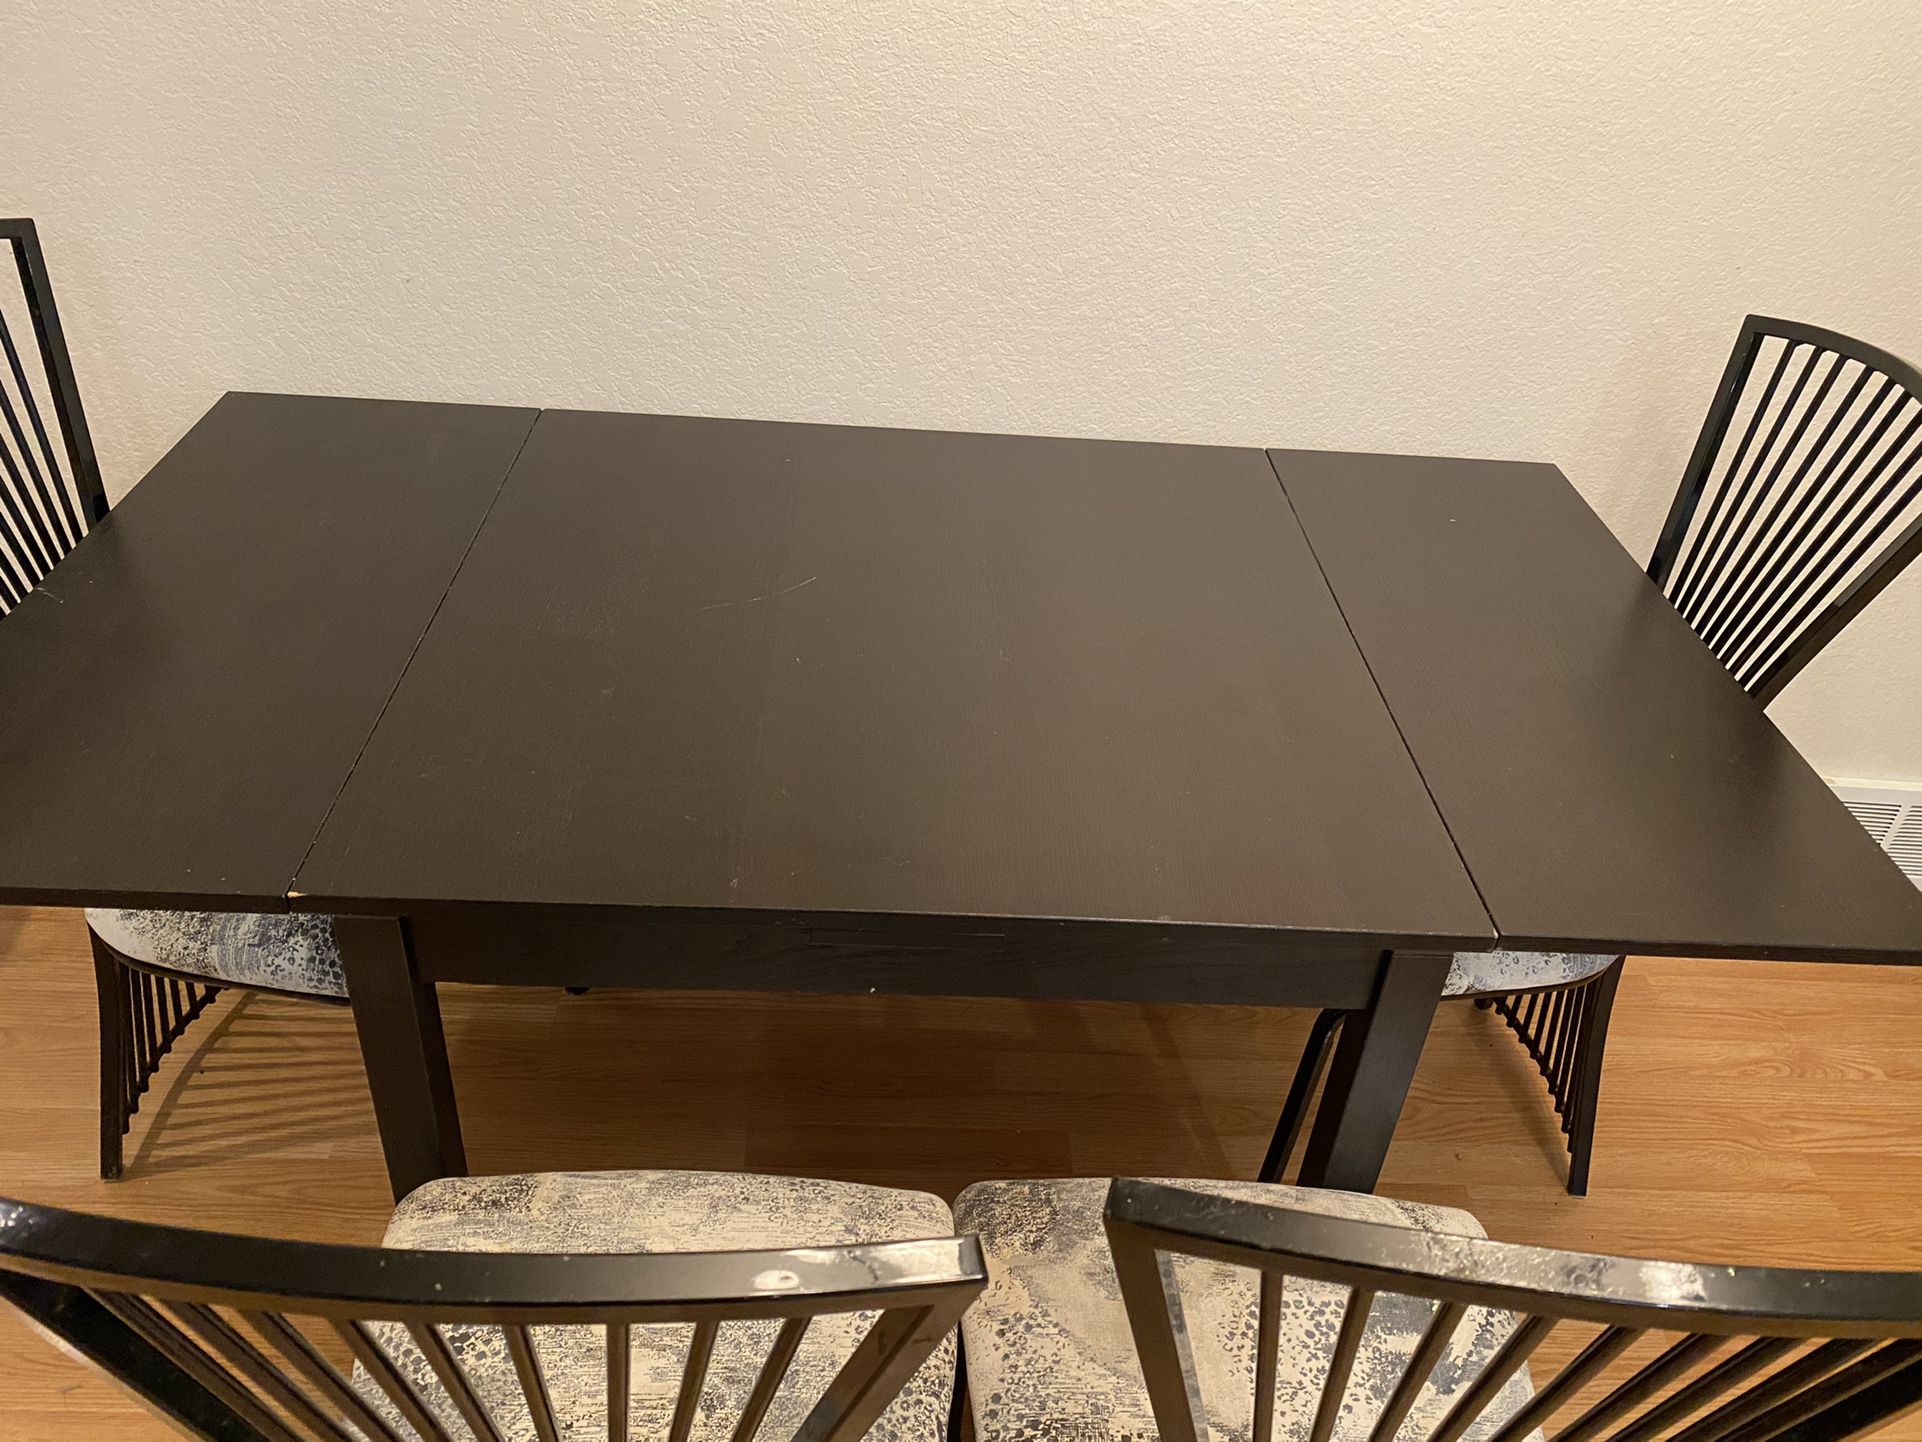 Black Dining Room Table (can Collapse) With 4 Chairs $130 OBO